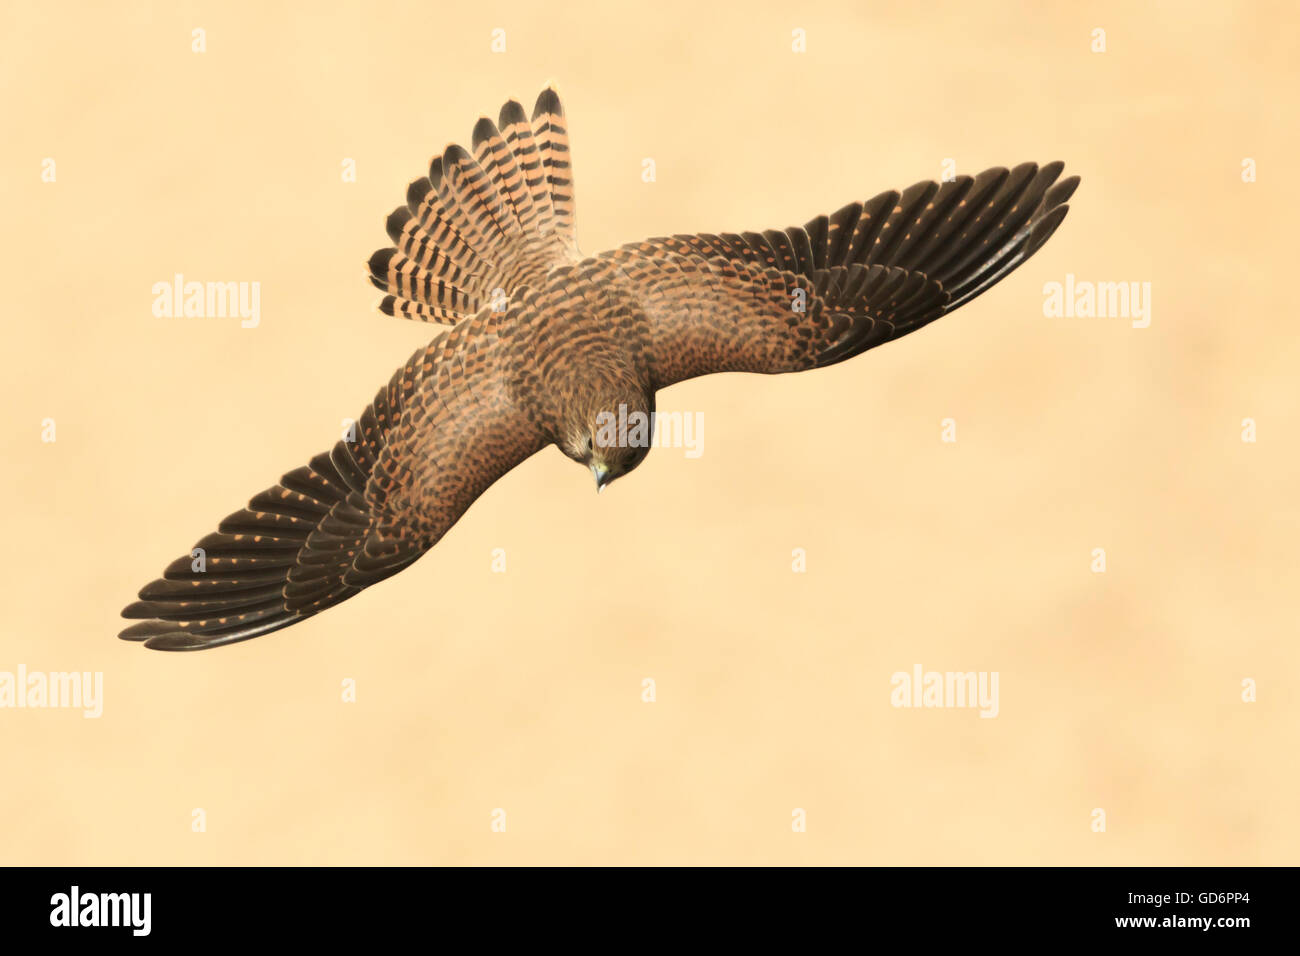 The common kestrel (Falco tinnunculus). Juvenile flying over the beach of Nazaré, Portugal seen from above the bird of prey Stock Photo